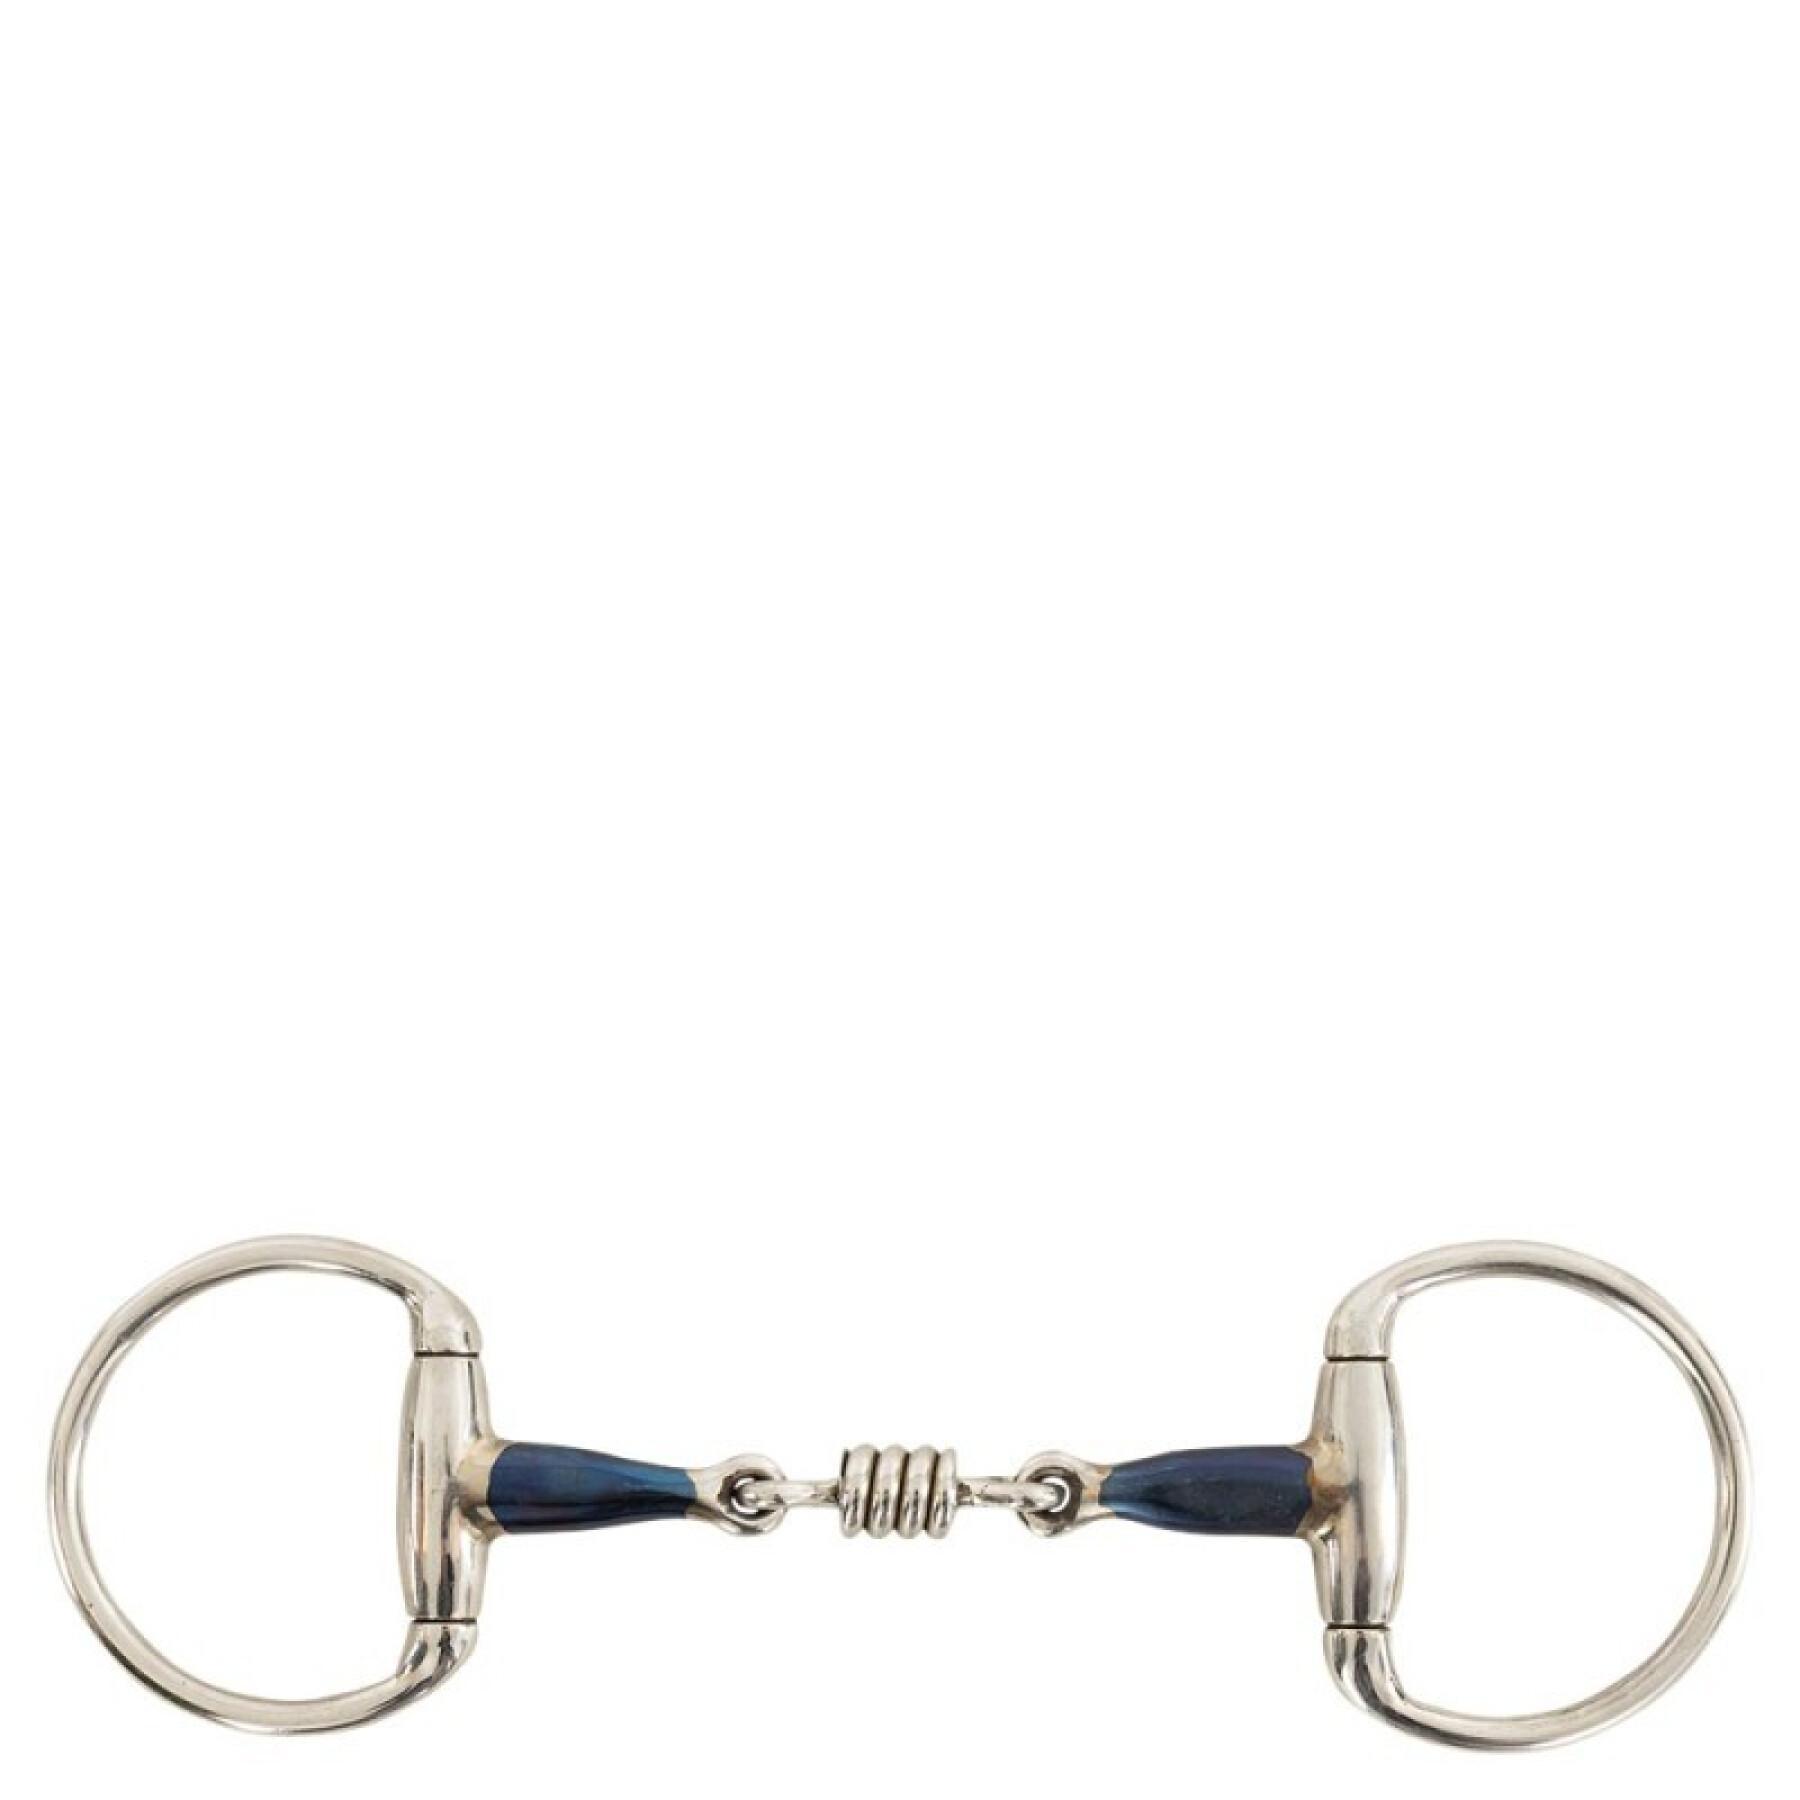 Double snaffle bit for horses in rolls BR Equitation